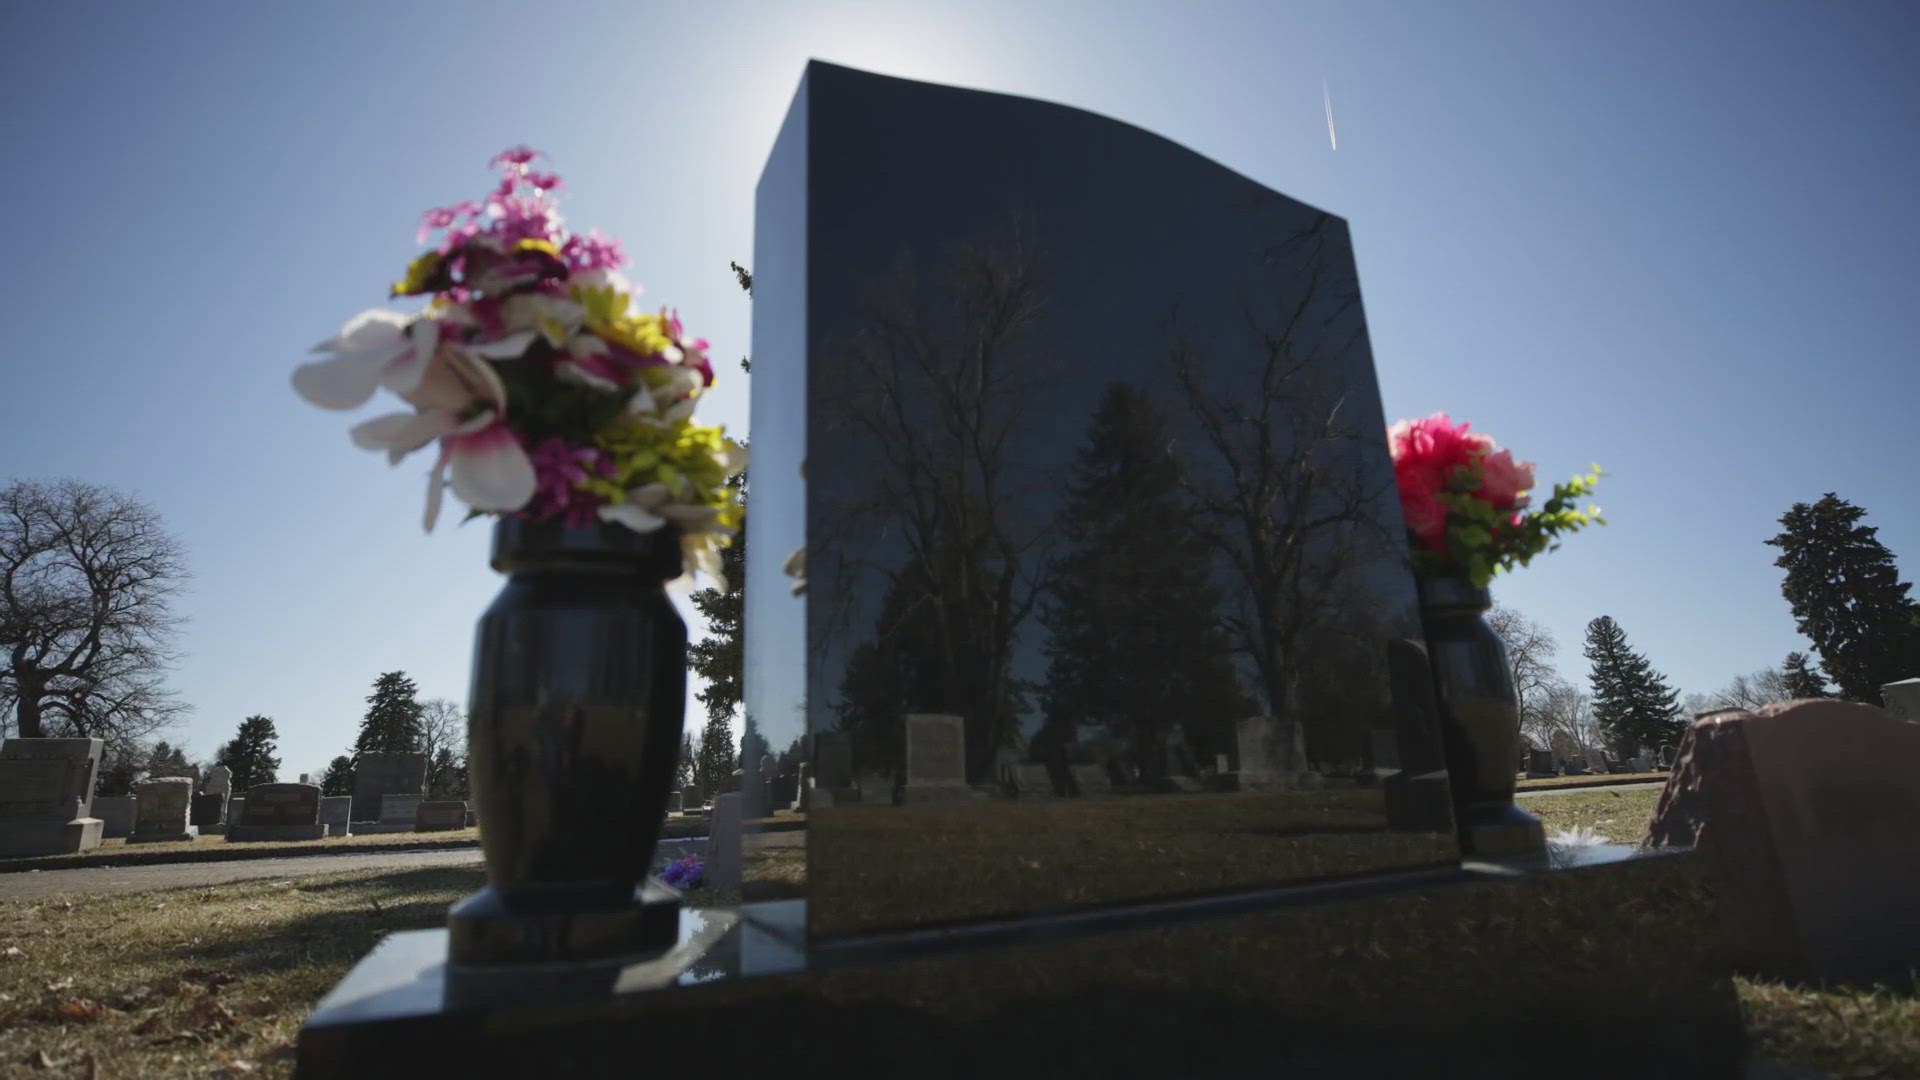 It comes after a legislative effort sparked by headlines of human remains being mishandled at funeral homes across the state.